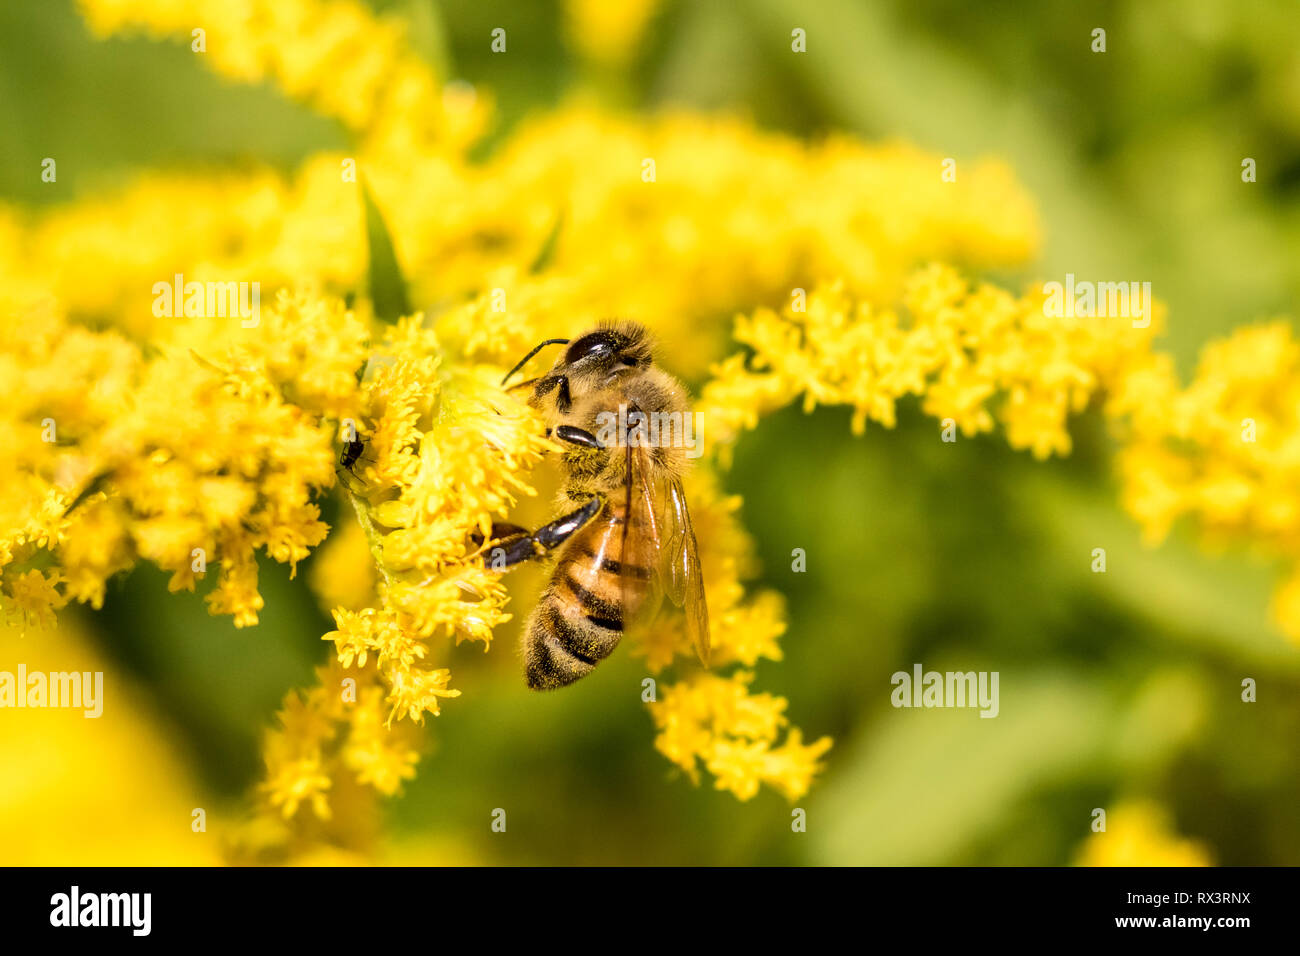 Western Honey Bee or European Honey Bee (Apis mellifera) on Goldenrod, Toronto, Ontario Canada - Honey Bees are important pollinators and honey makers but were introduced to North America Stock Photo